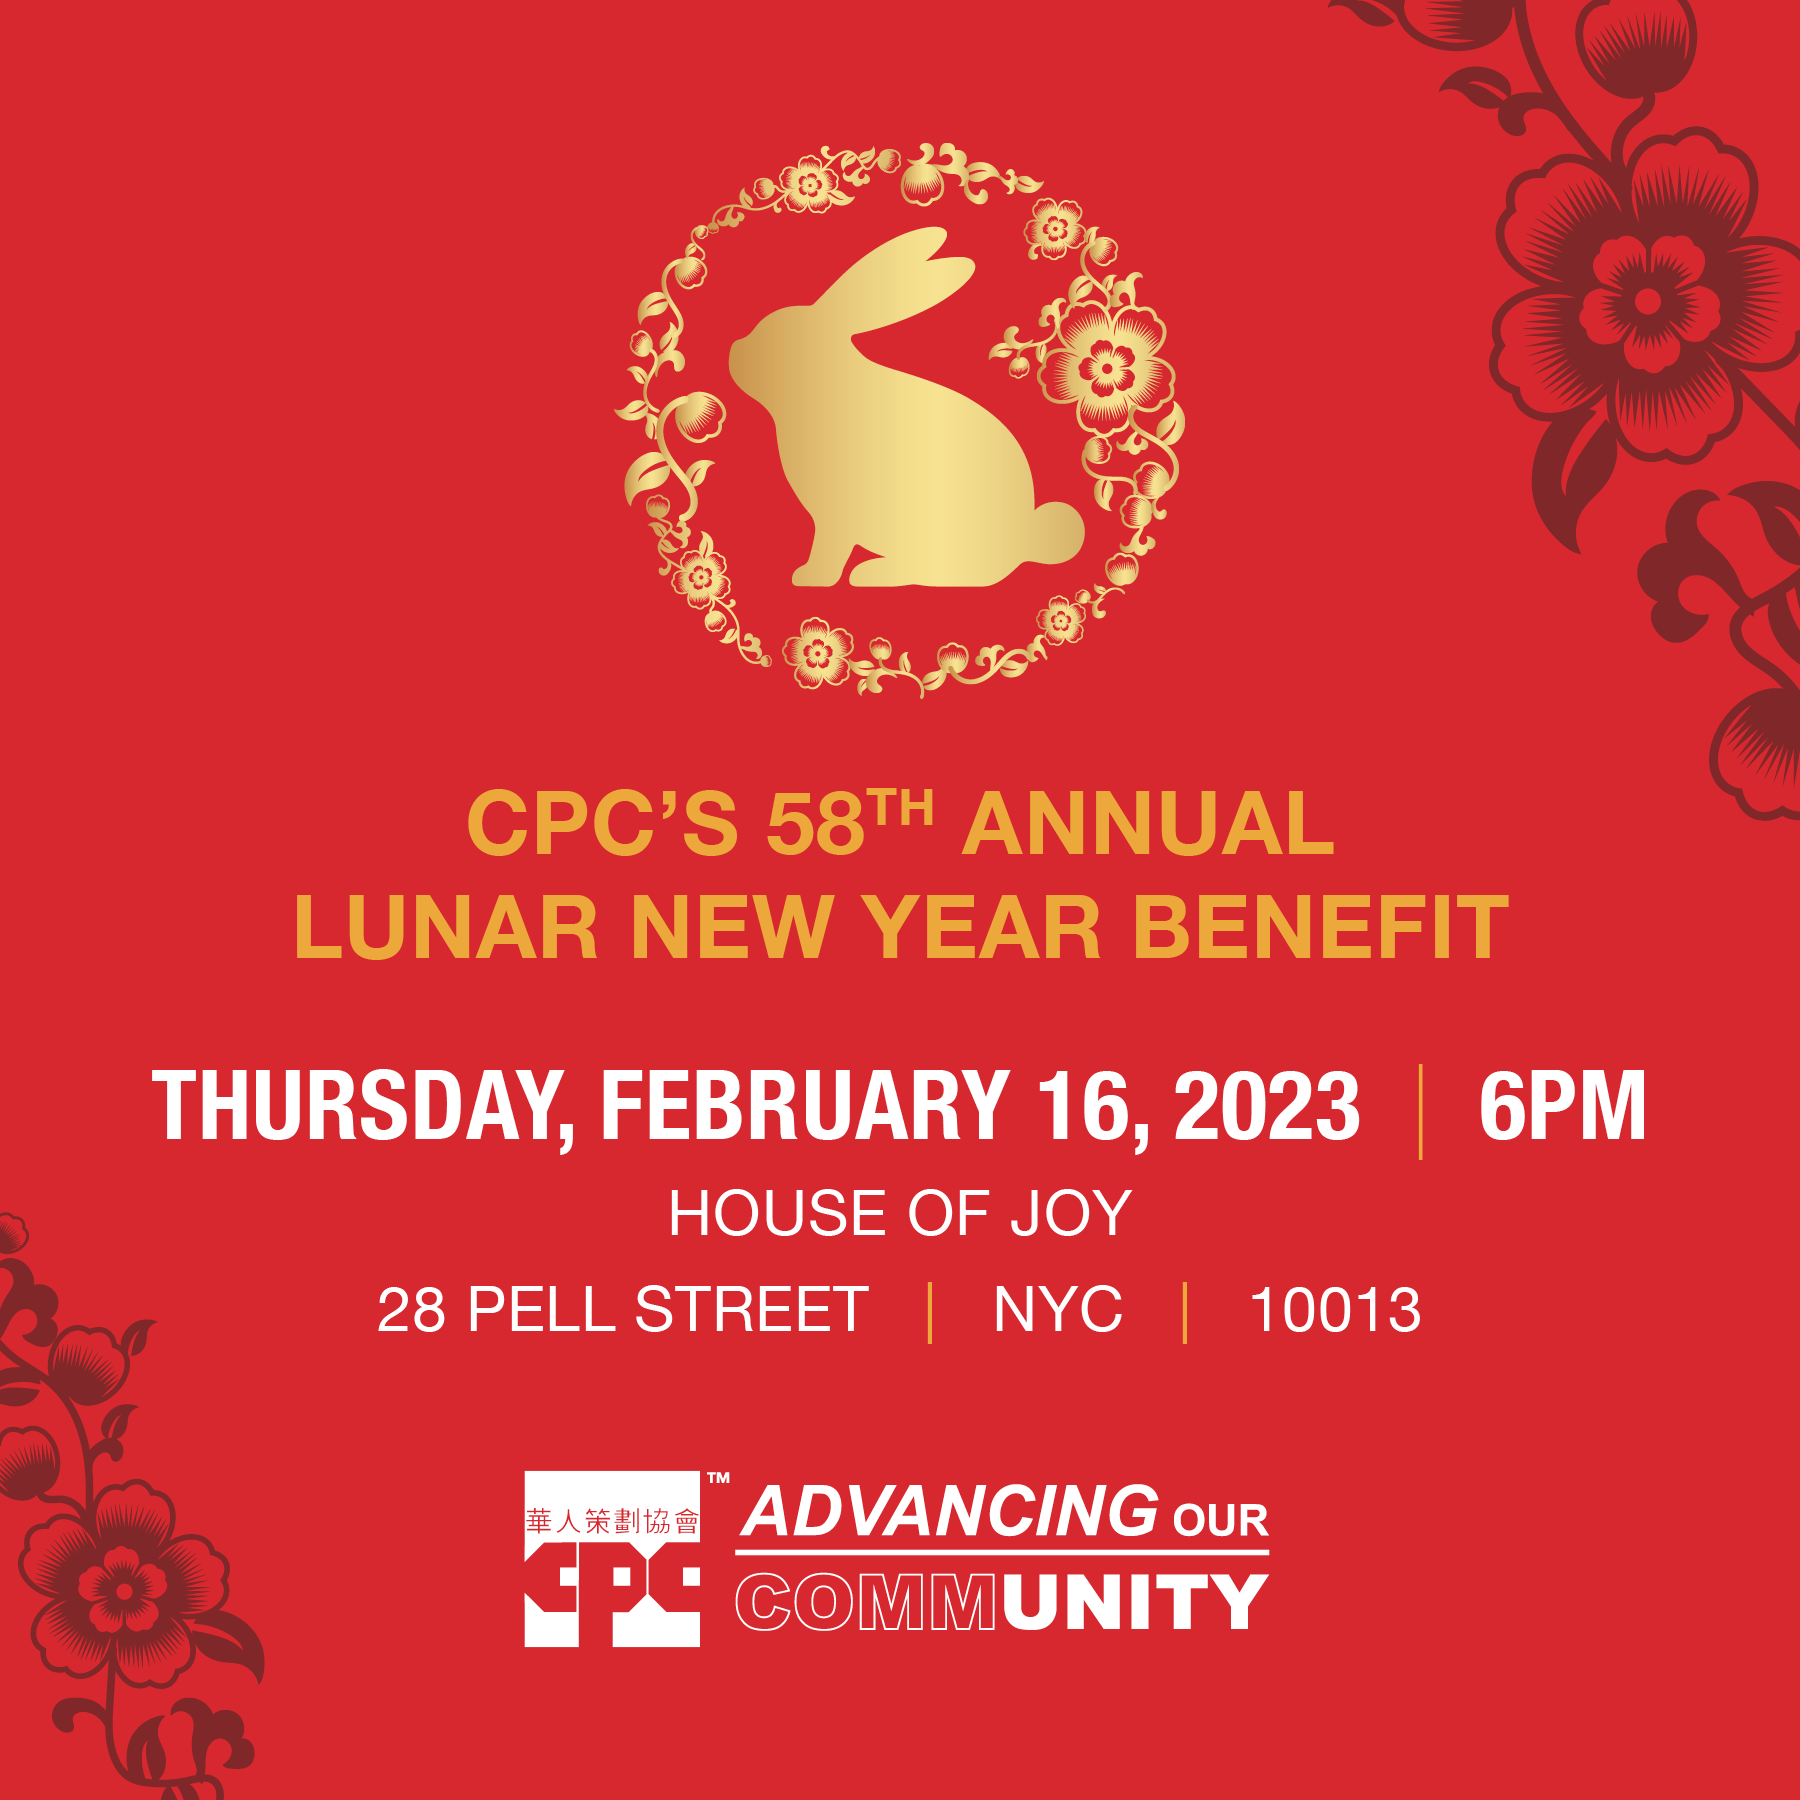  Lunar New Year 2023 Card, Chinese New Year